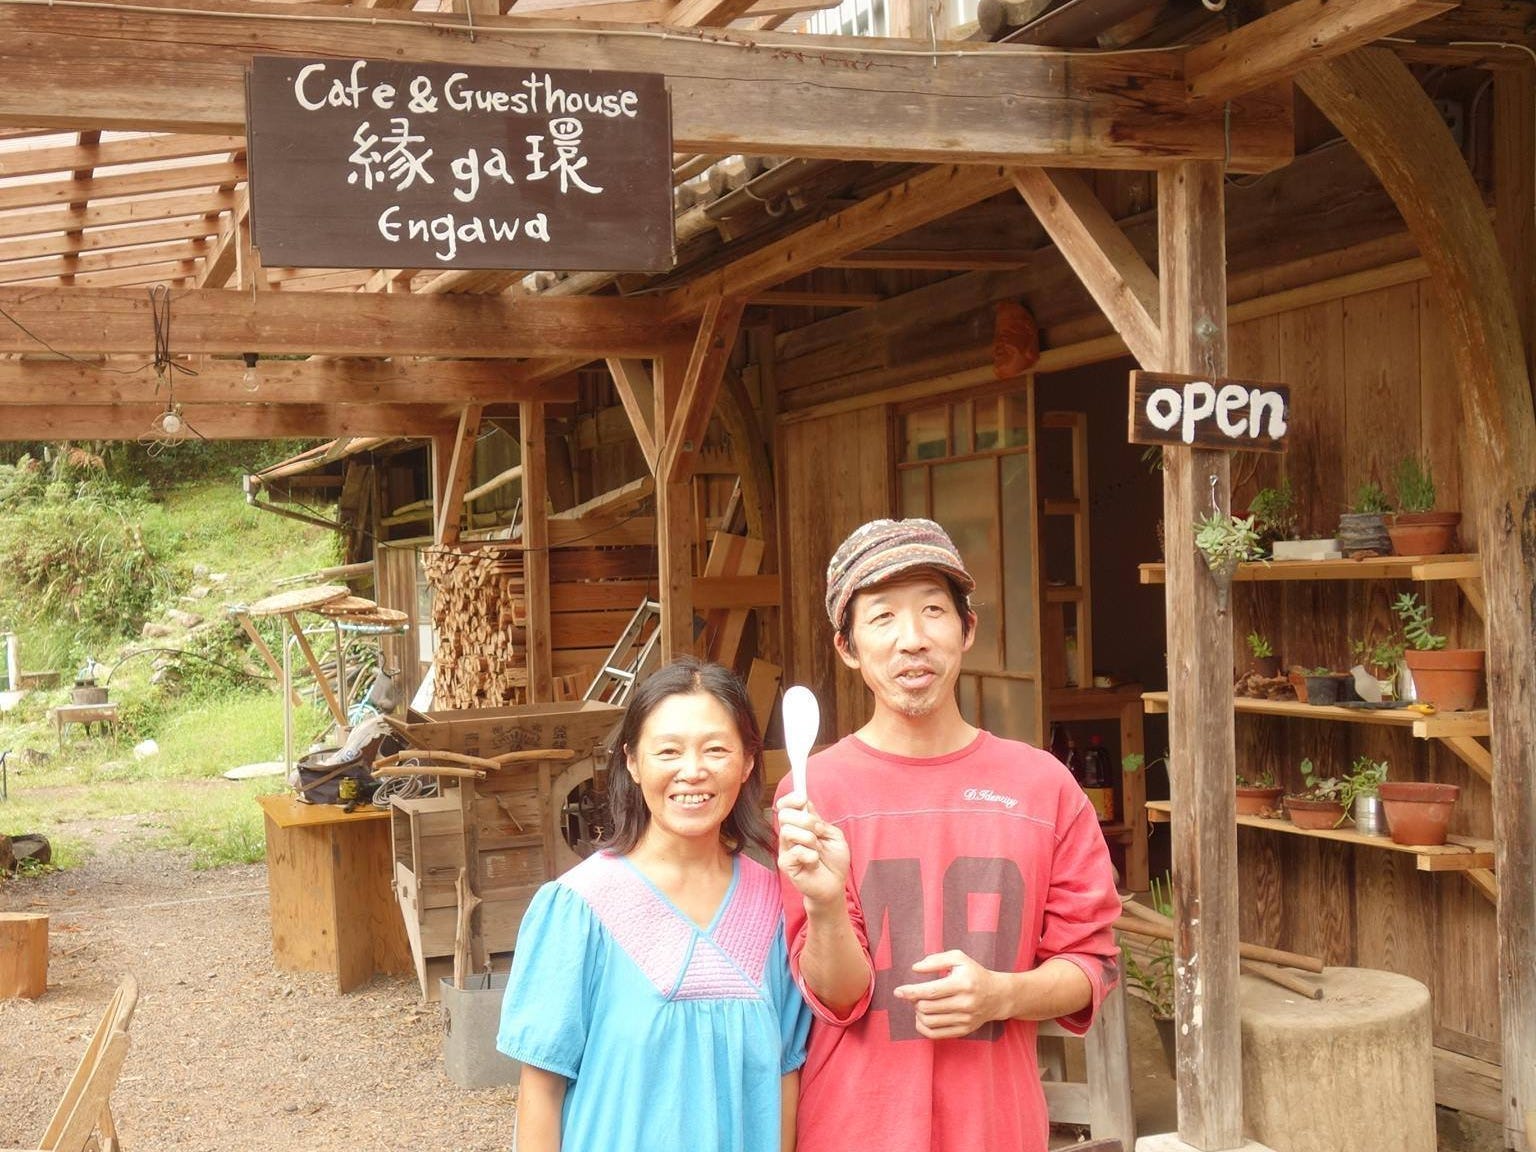 Uchiyama Seichi and his wife in front of their countryside home, where they now run a farm and a cafe.